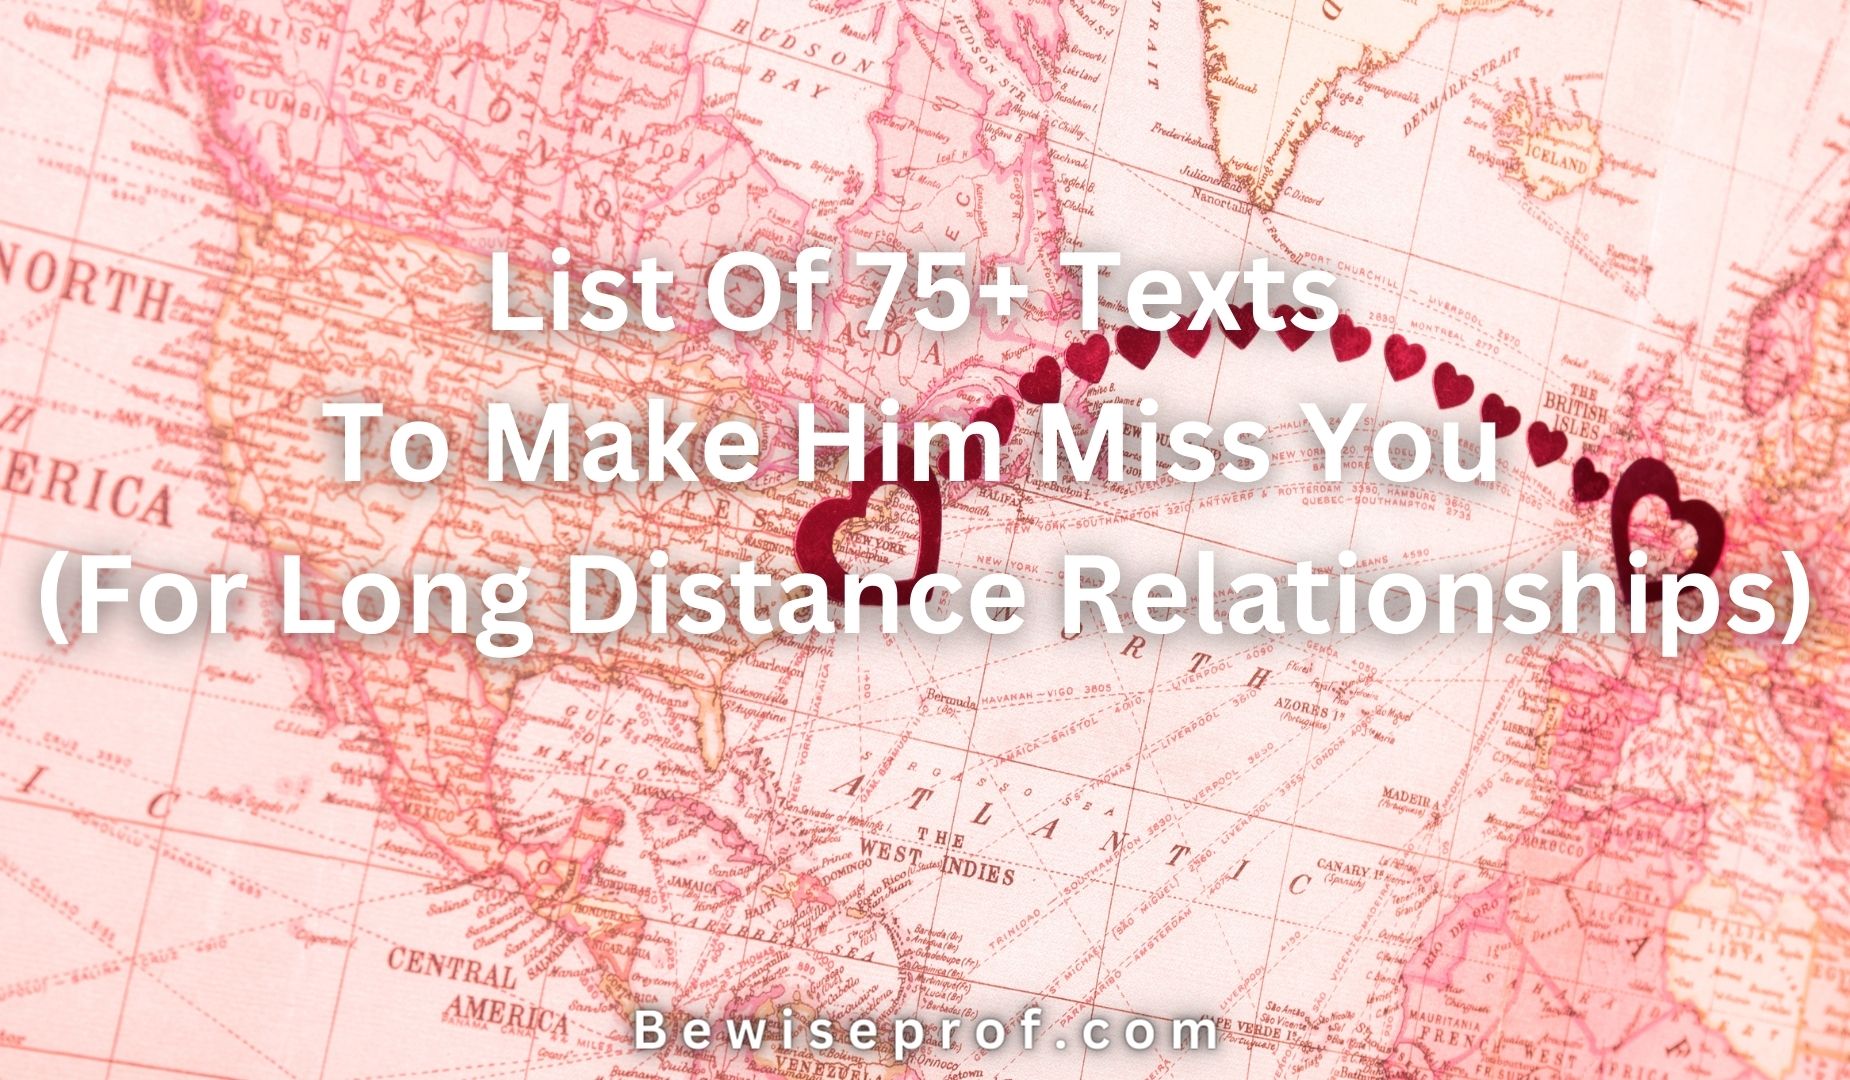 List Of 75+ Texts To Make Him Miss You (For Long Distance Relationships)